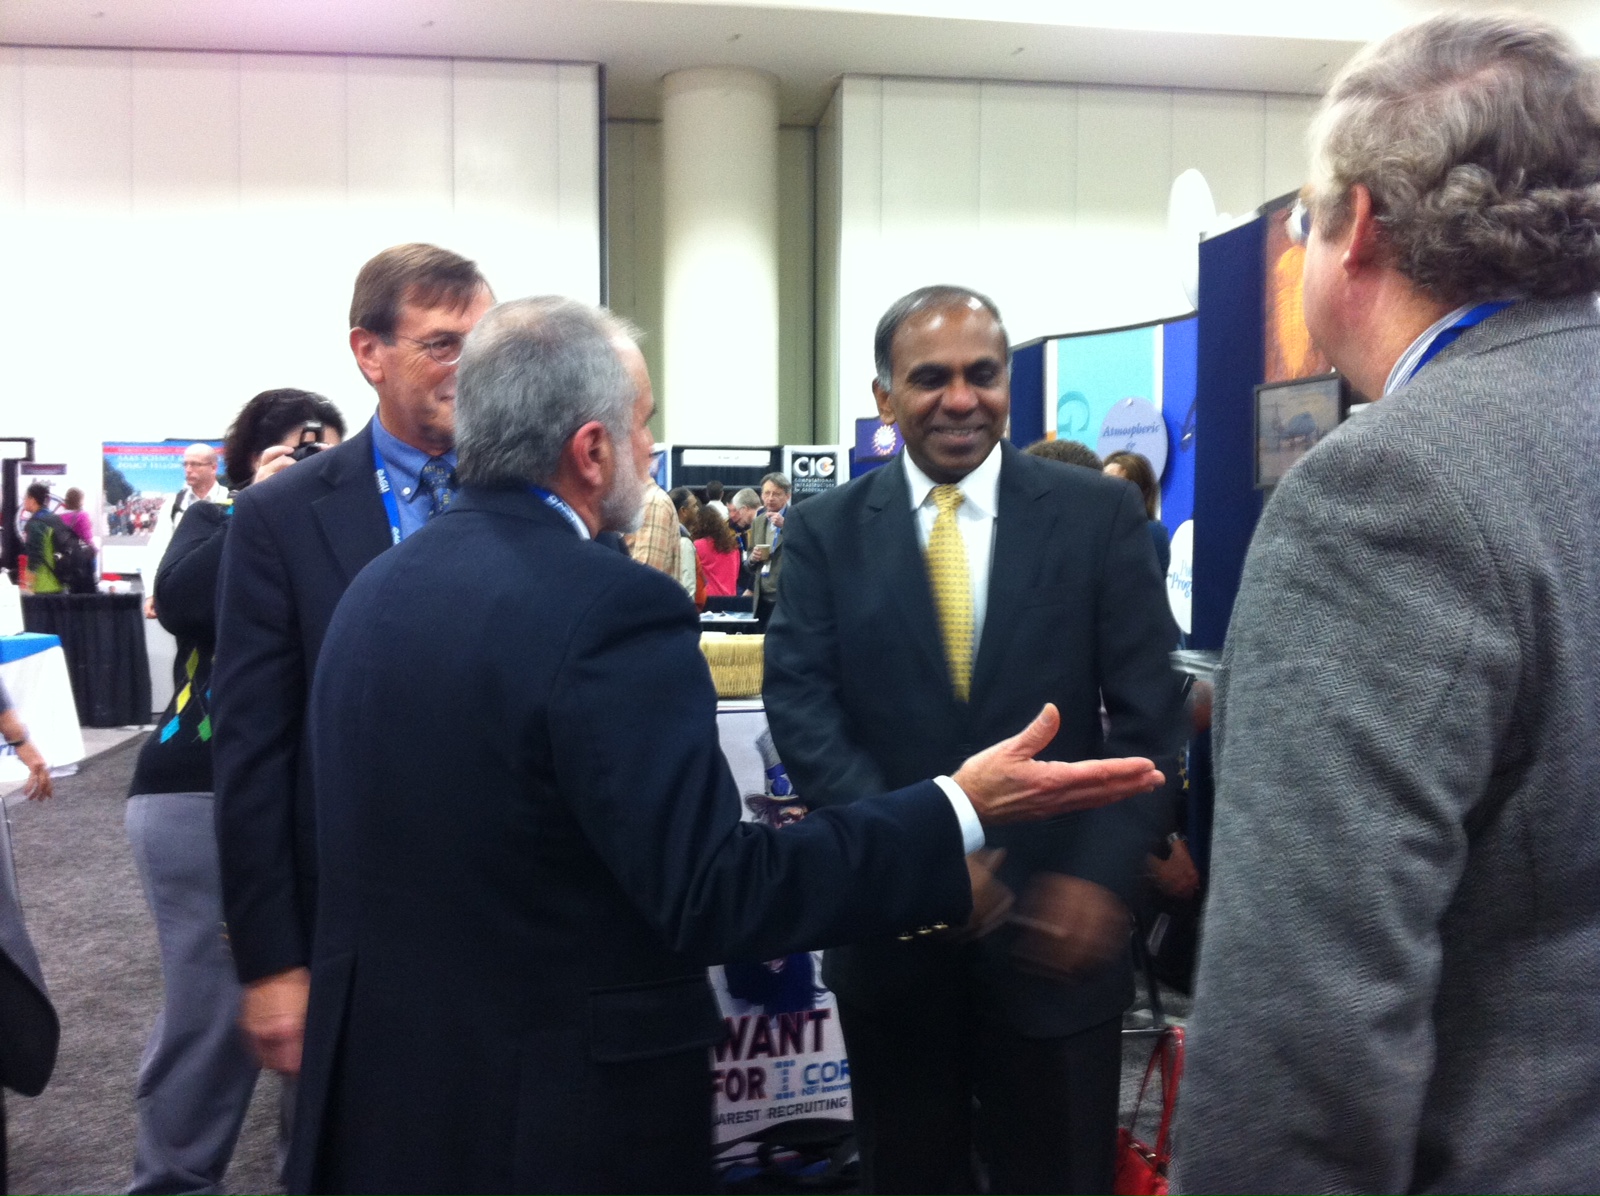 Tim Cowles, Vice President & Director of Ocean Observing at the Consortium for Ocean Leadership and Bob Gagosian, President and CEO of the Consortium for Ocean Leadership meet with Subra Suresh, Director of the National Science Foundation in the exhibit hall. (Photo Credit: Julie Farver, Senior Manager, Meetings and Travel, Consortium for Ocean Leadership)